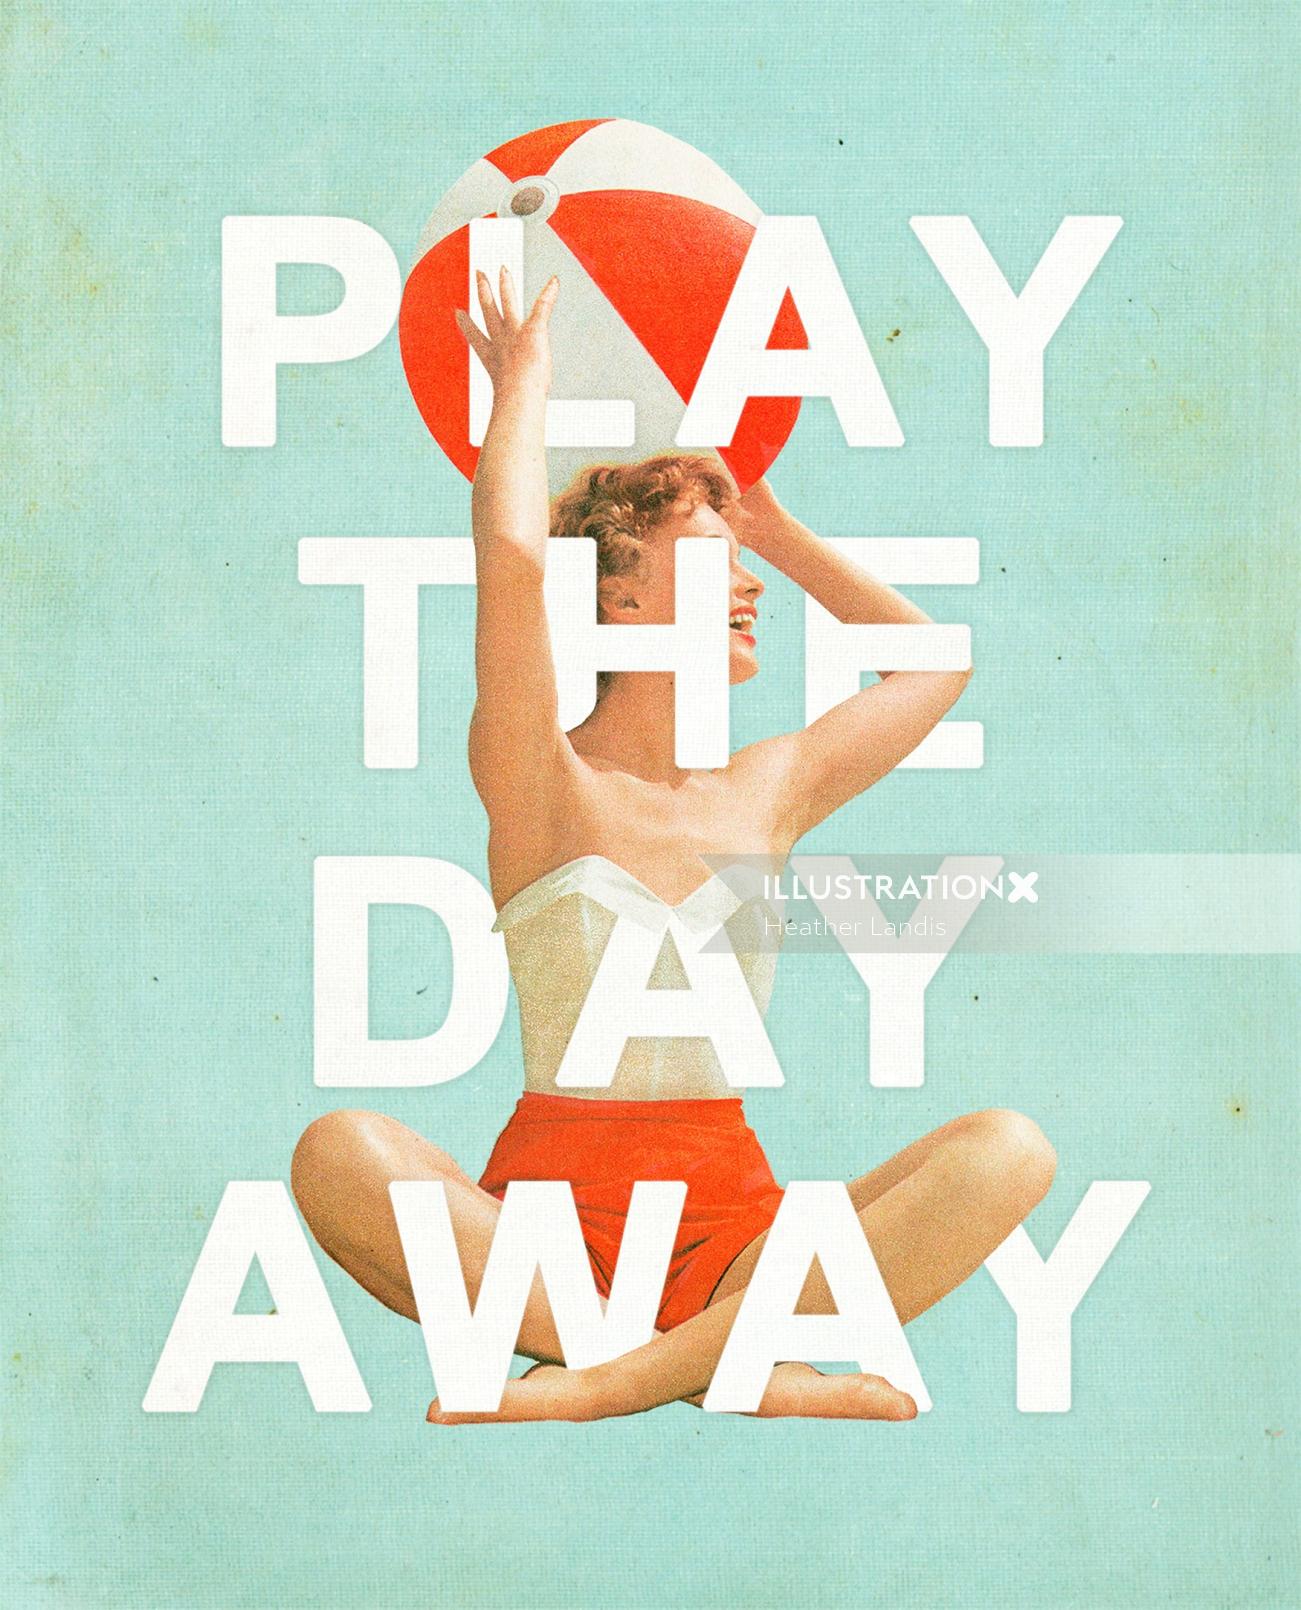 An illustration concept of play the day away